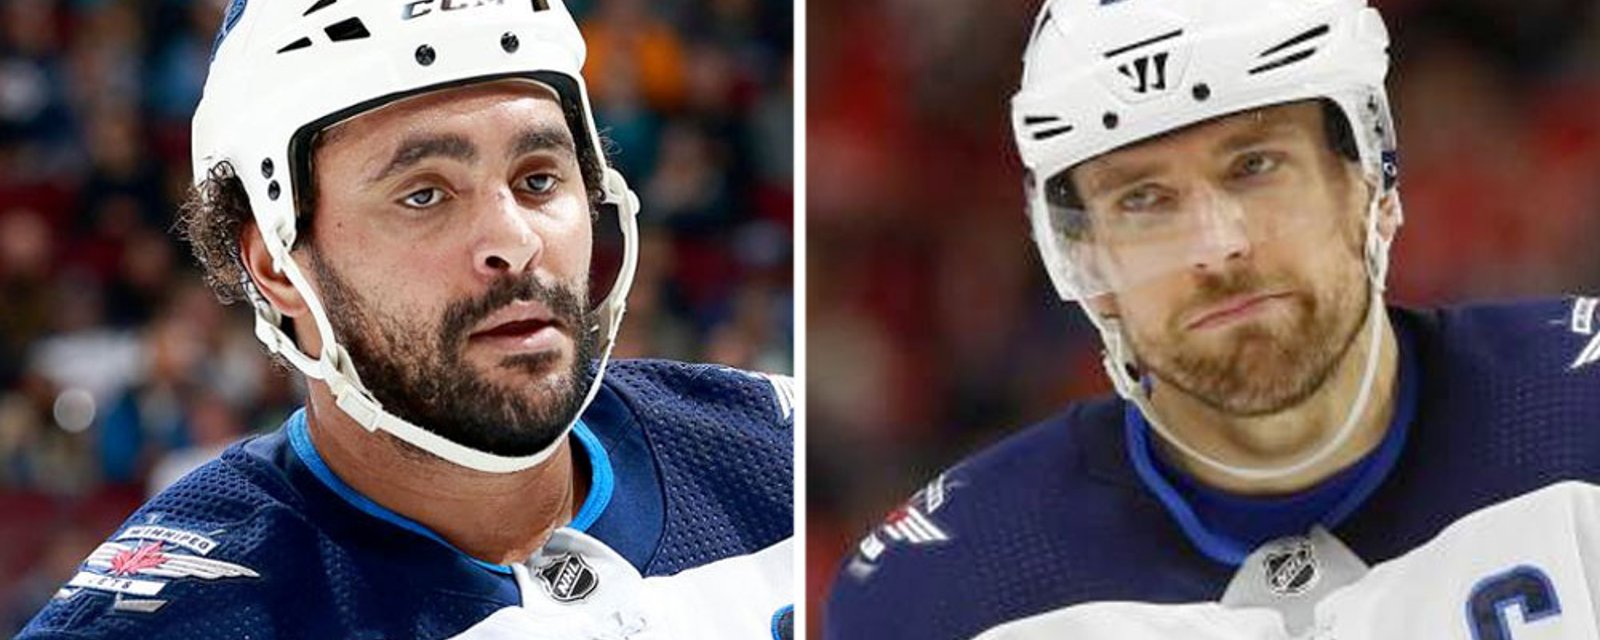 Reports of a “divide” in the Jets’ locker room and how it pushed out Byfuglien